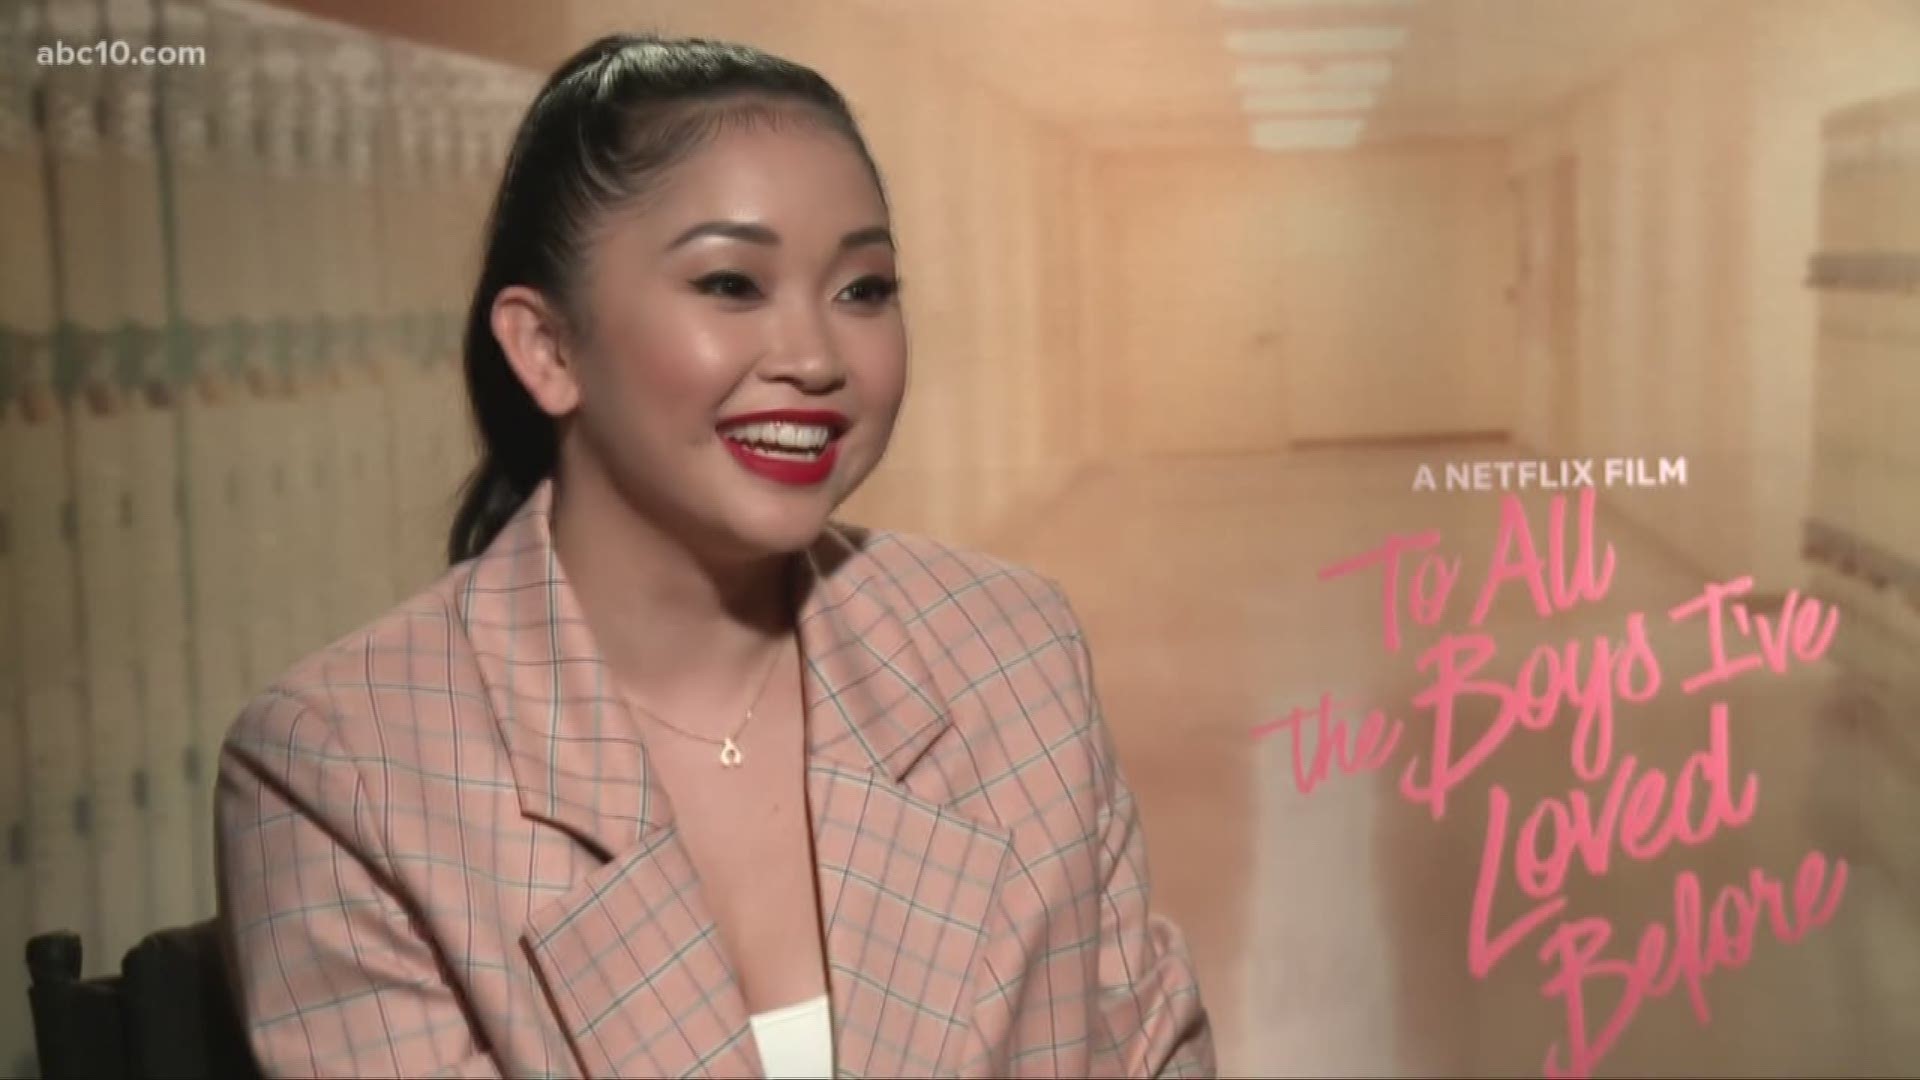 Mark S. Allen sits down with Lana Condor to talk about the new Netflix movie "To All the Boys I Loved Before."